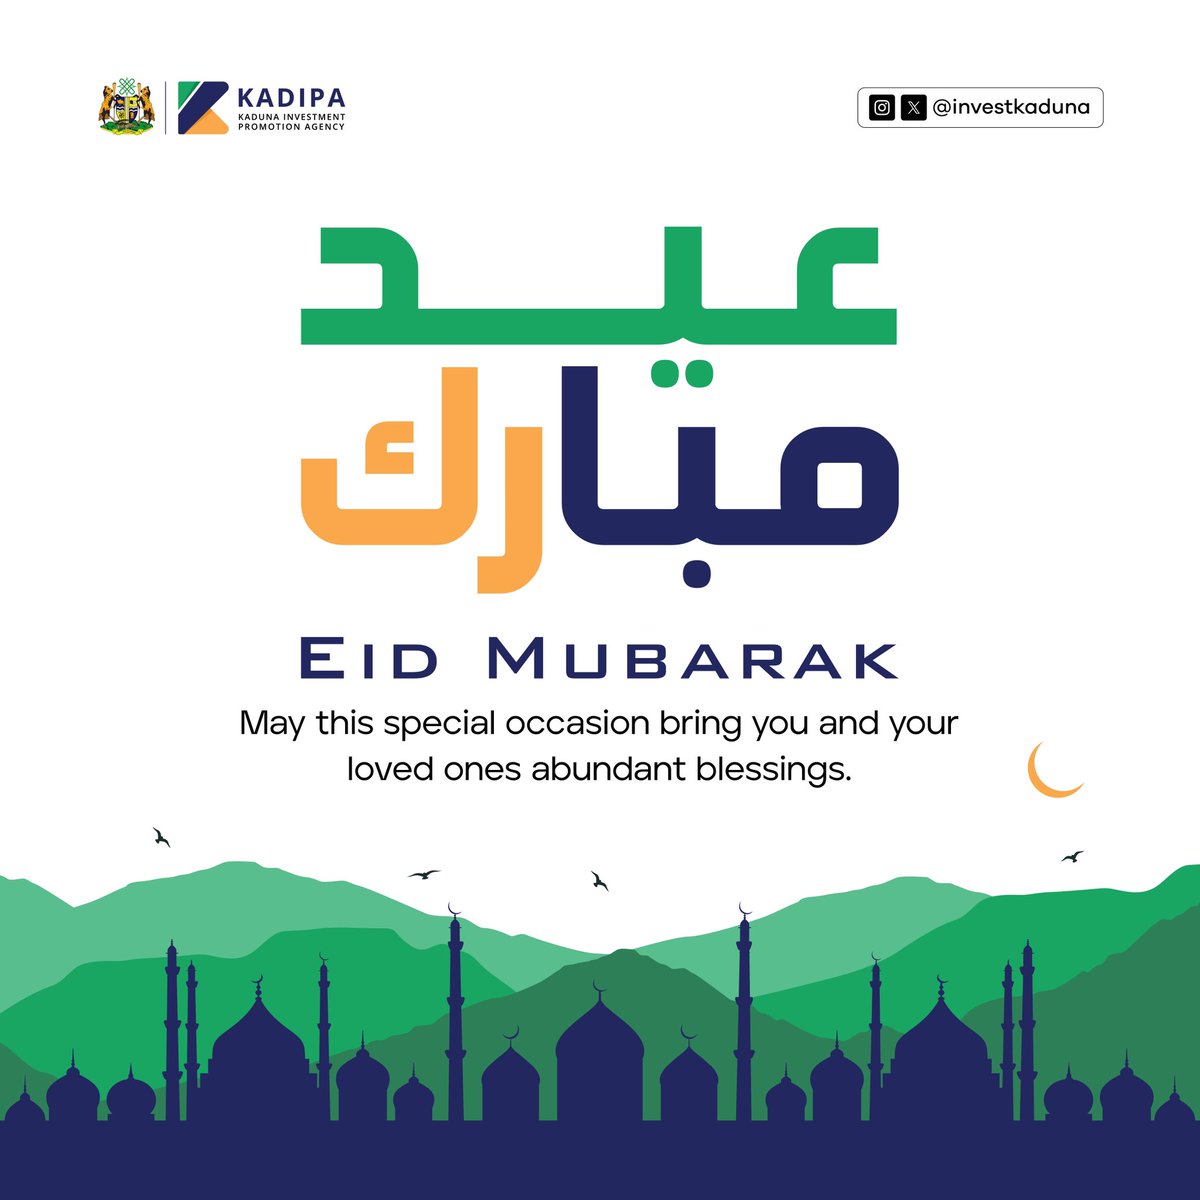 We are wishing you joy, happiness, and prosperity to you and your loved ones on this special day, Eid Mubarak from all of us at KADIPA.